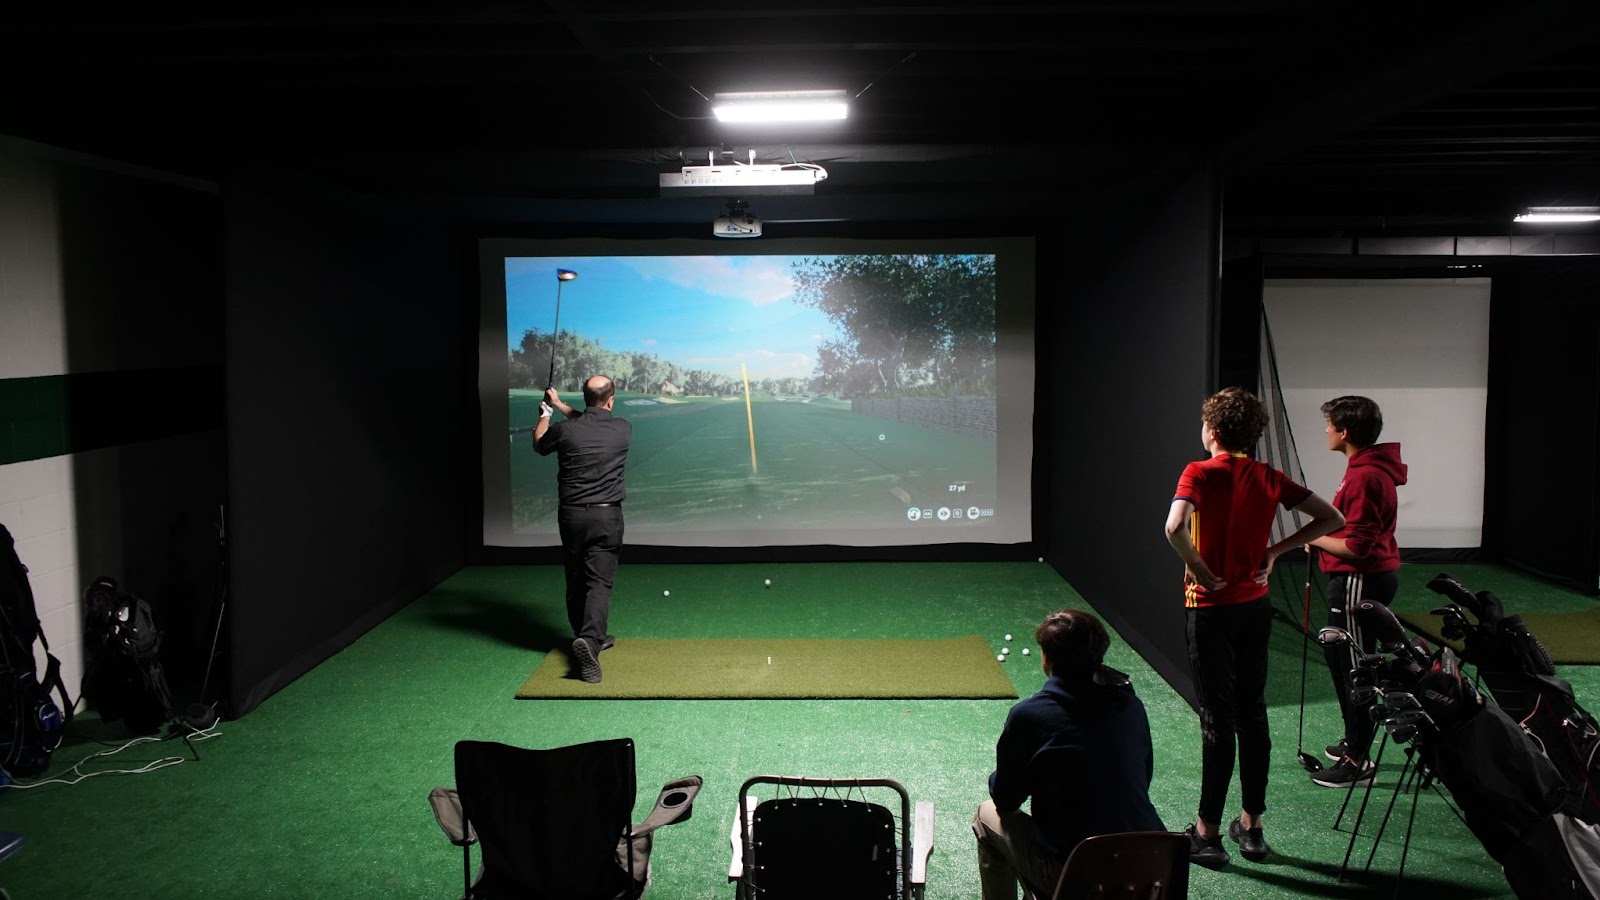 Students and coach playing on golf simulator